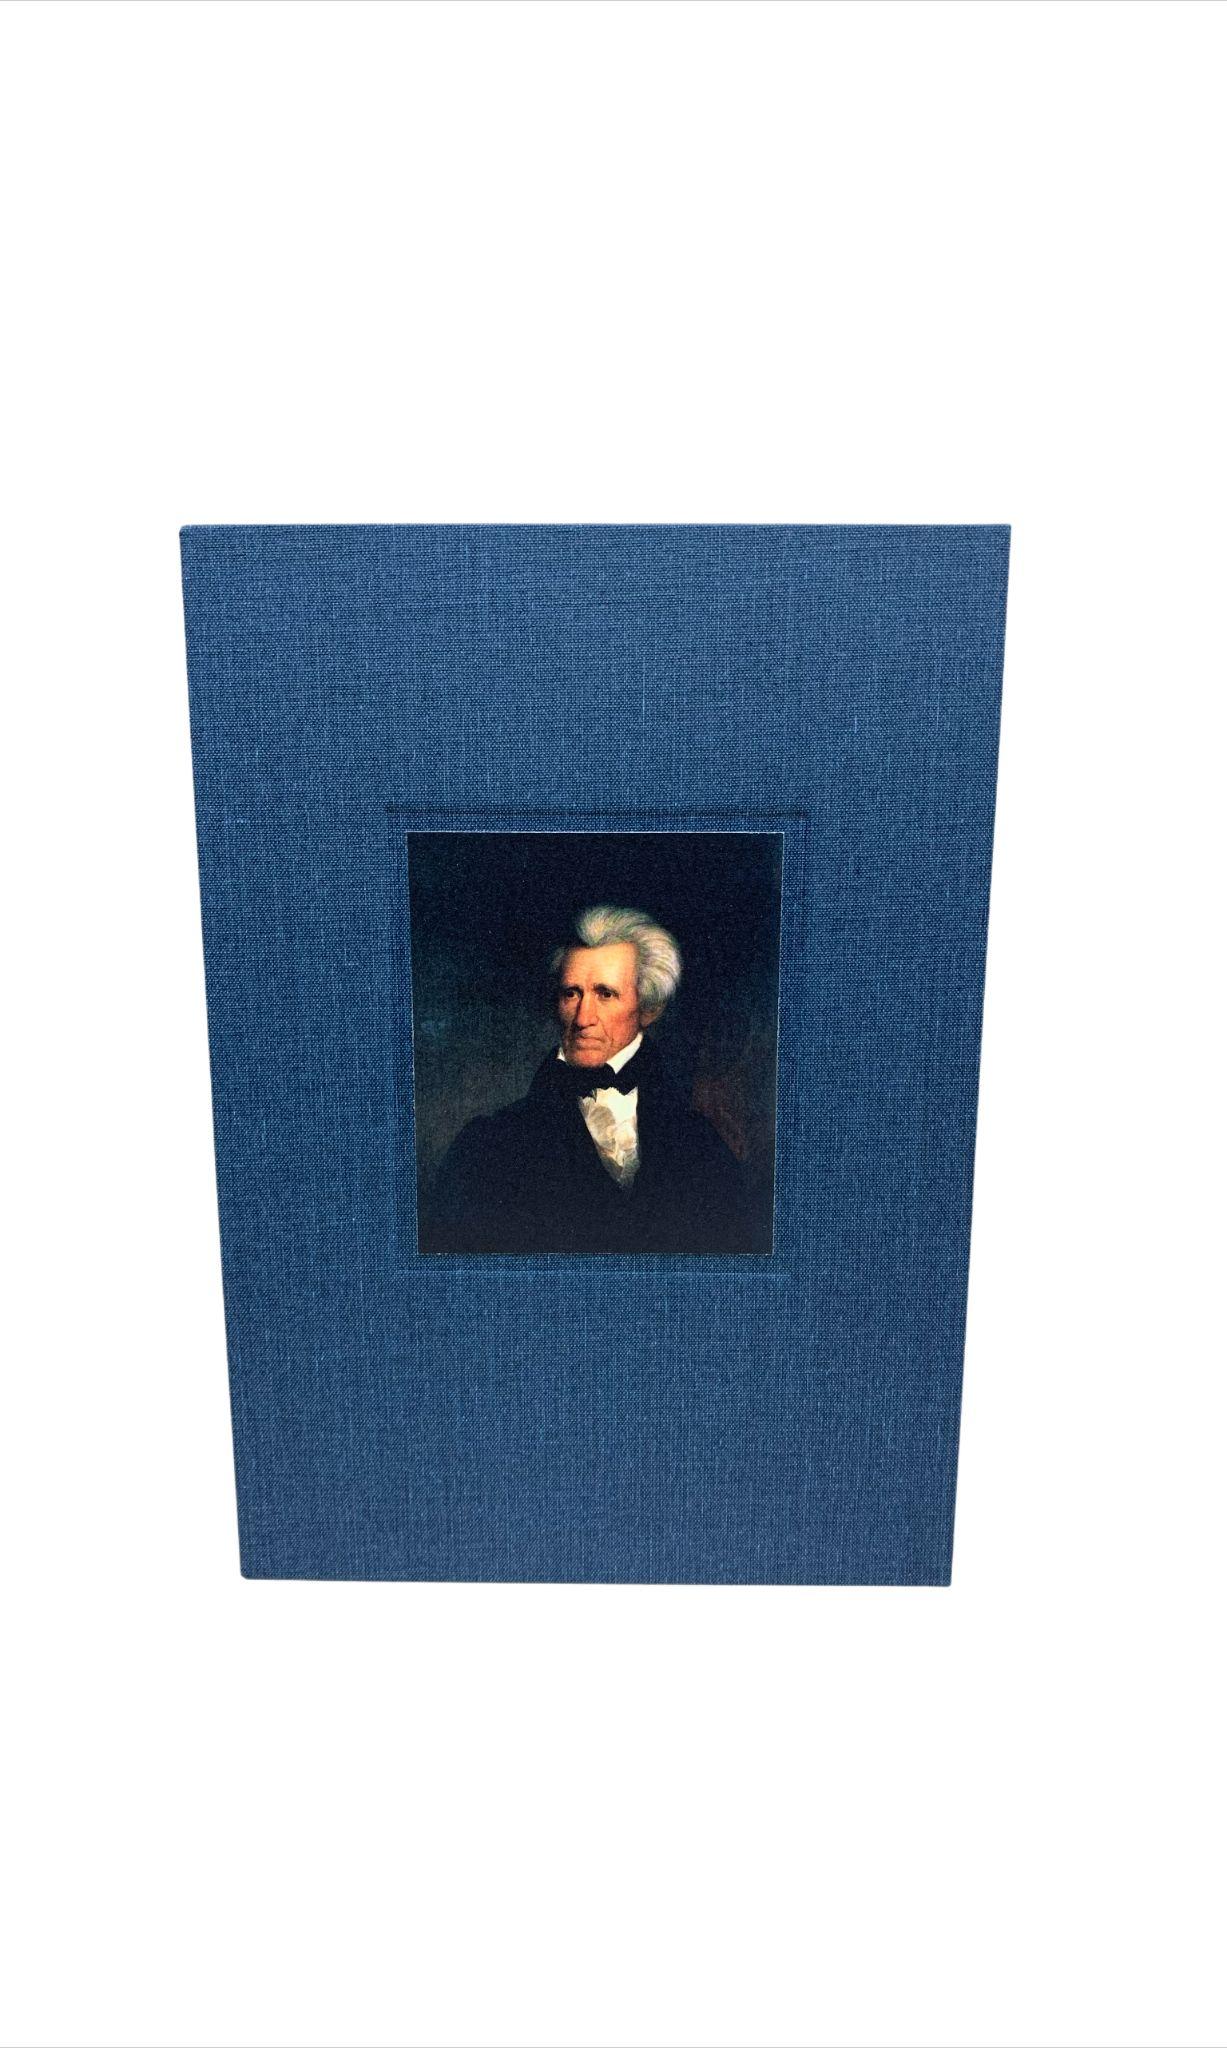 Life of Andrew Jackson by James Parton 3-Volume Leather Set, 1876 In Good Condition For Sale In Colorado Springs, CO